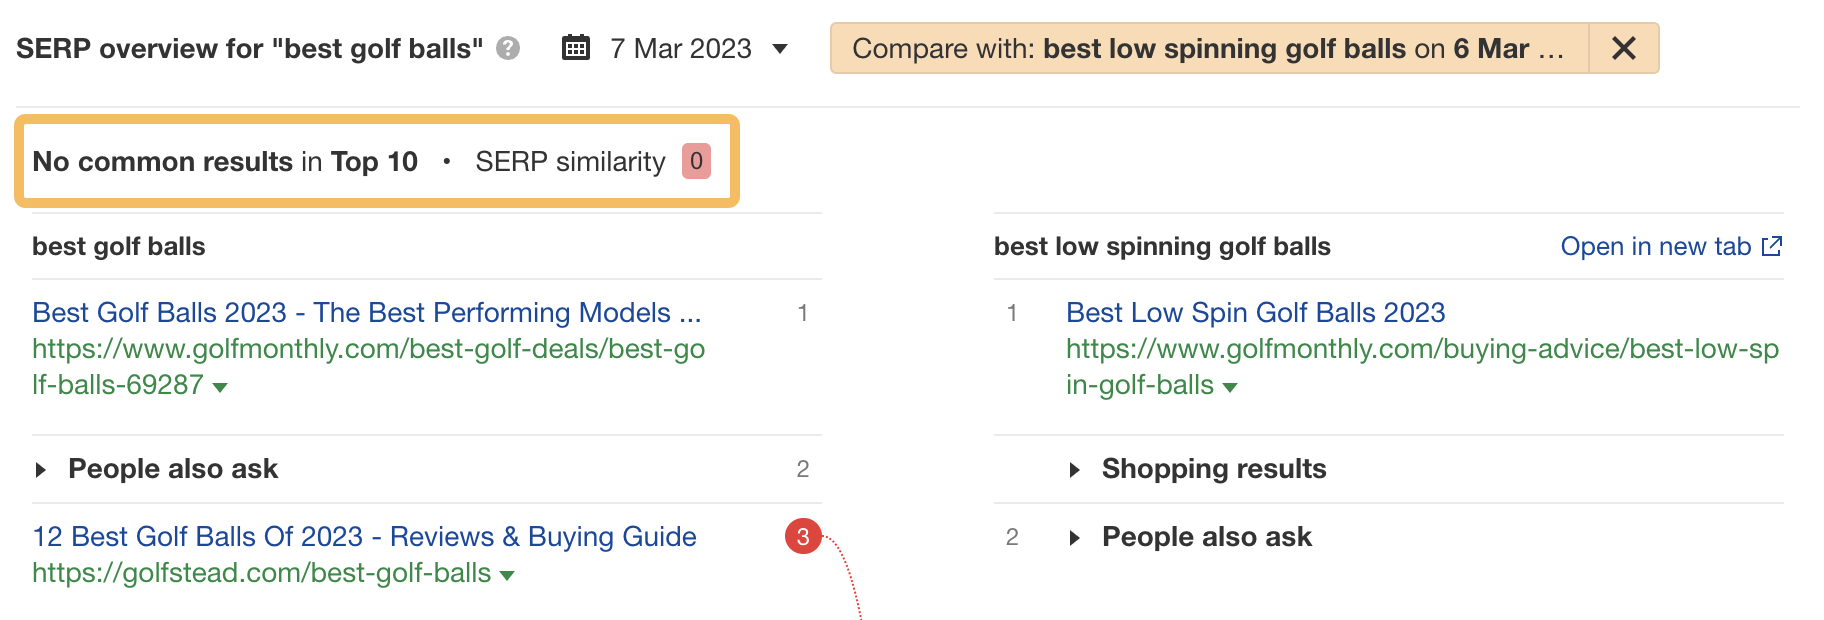 SERP similarity score of 0/100 for "best golf balls" and "best low spinning golf balls"
